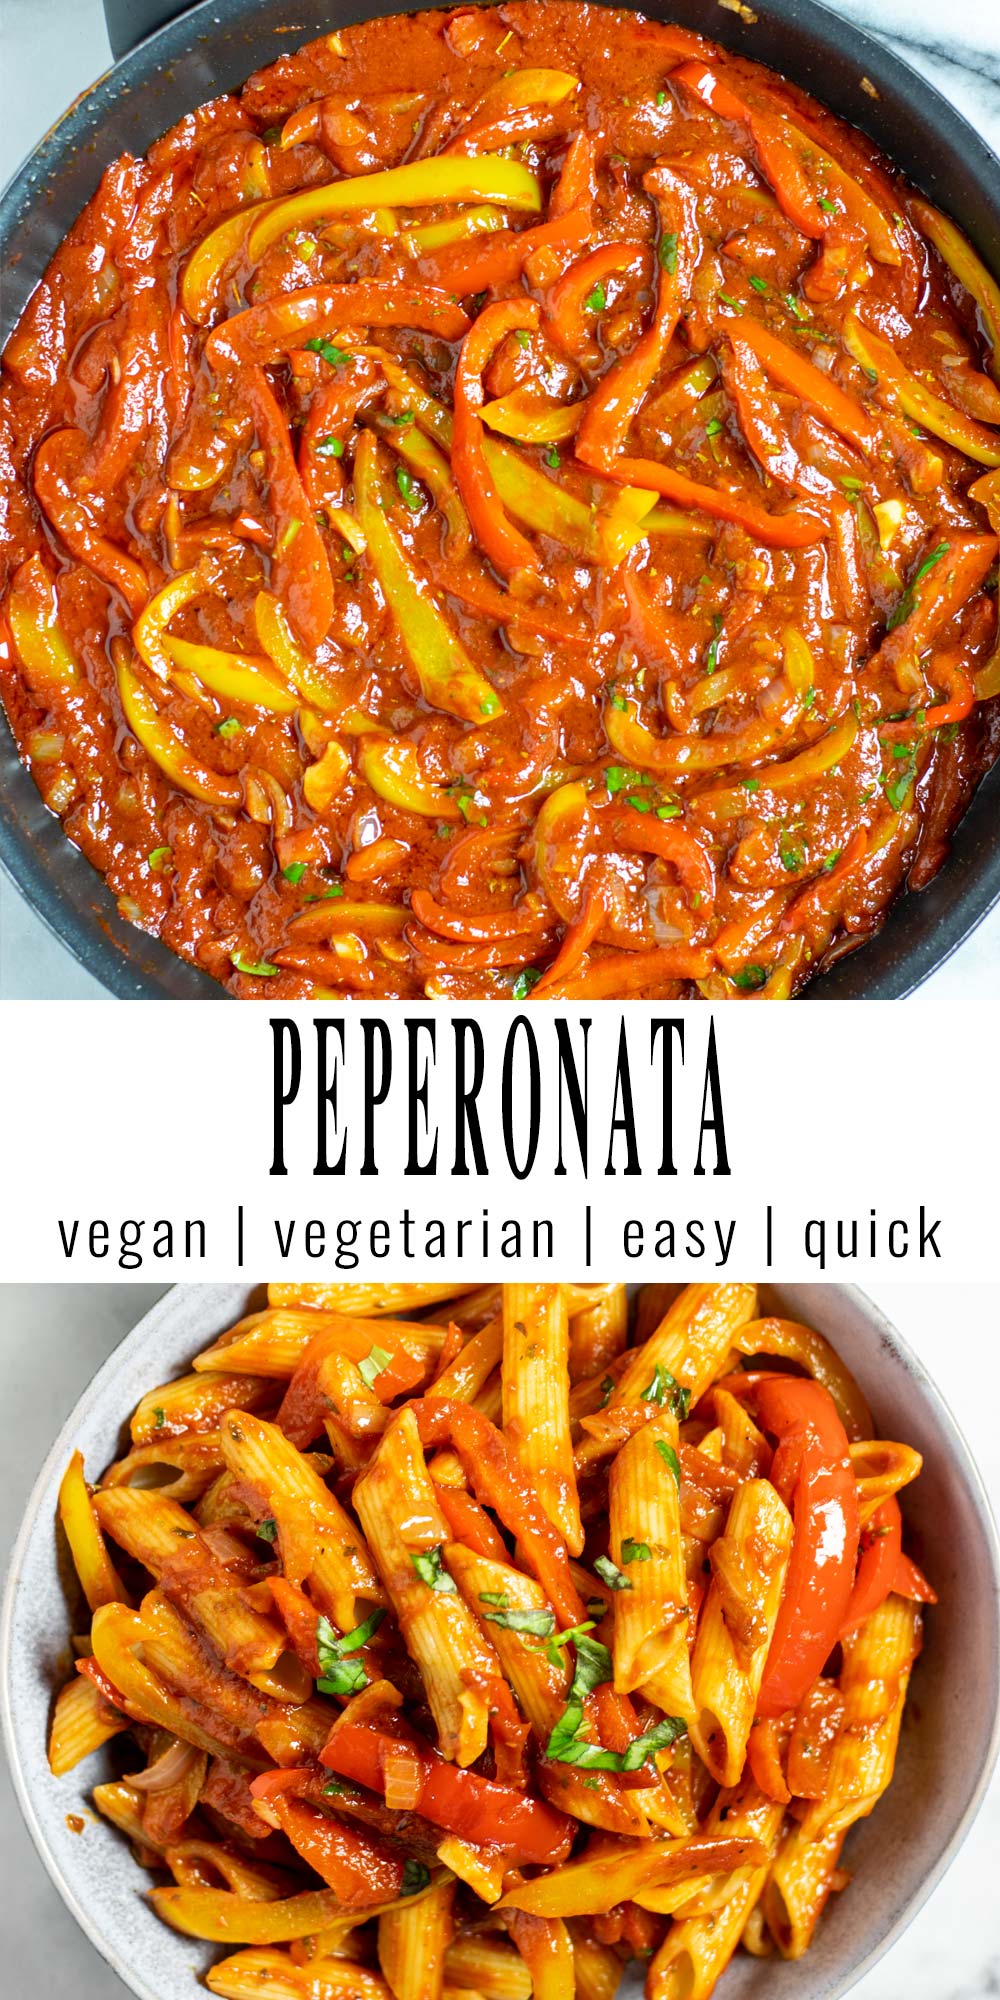 Collage of two pictures of the Peperonata with recipe title text.